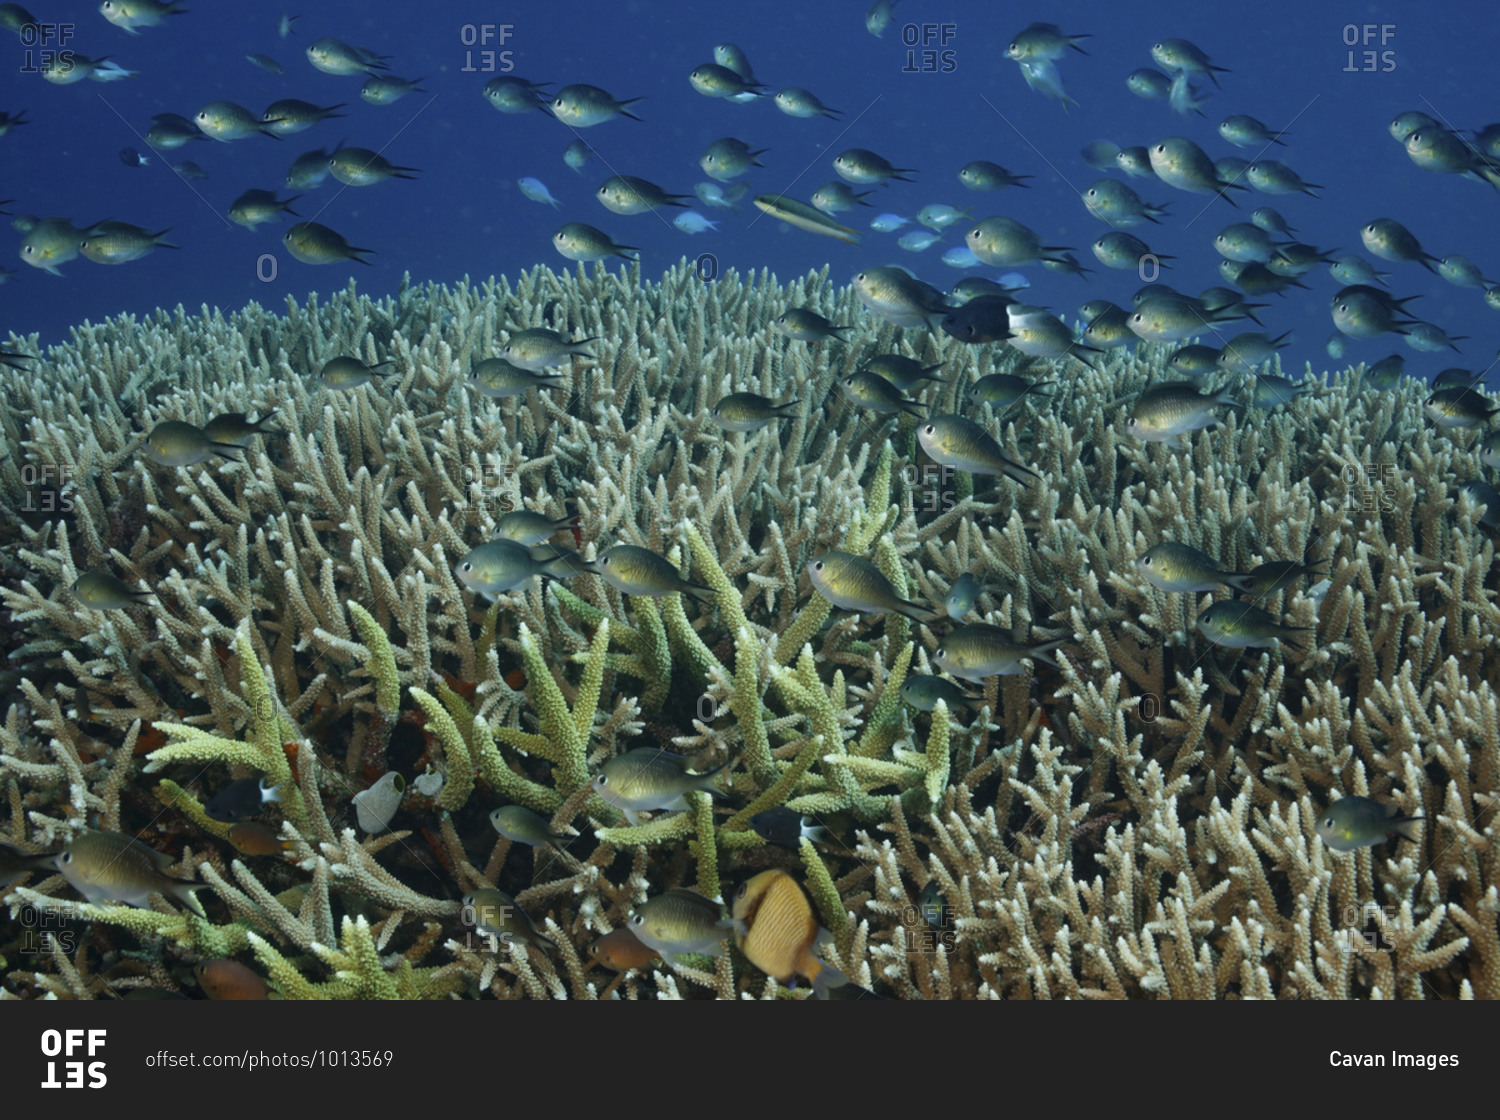 School of Chromis fish swimming above staghorn coral (Acropora Cervi ornis), Great Detached Reef, Great Barrier Reef, Australia